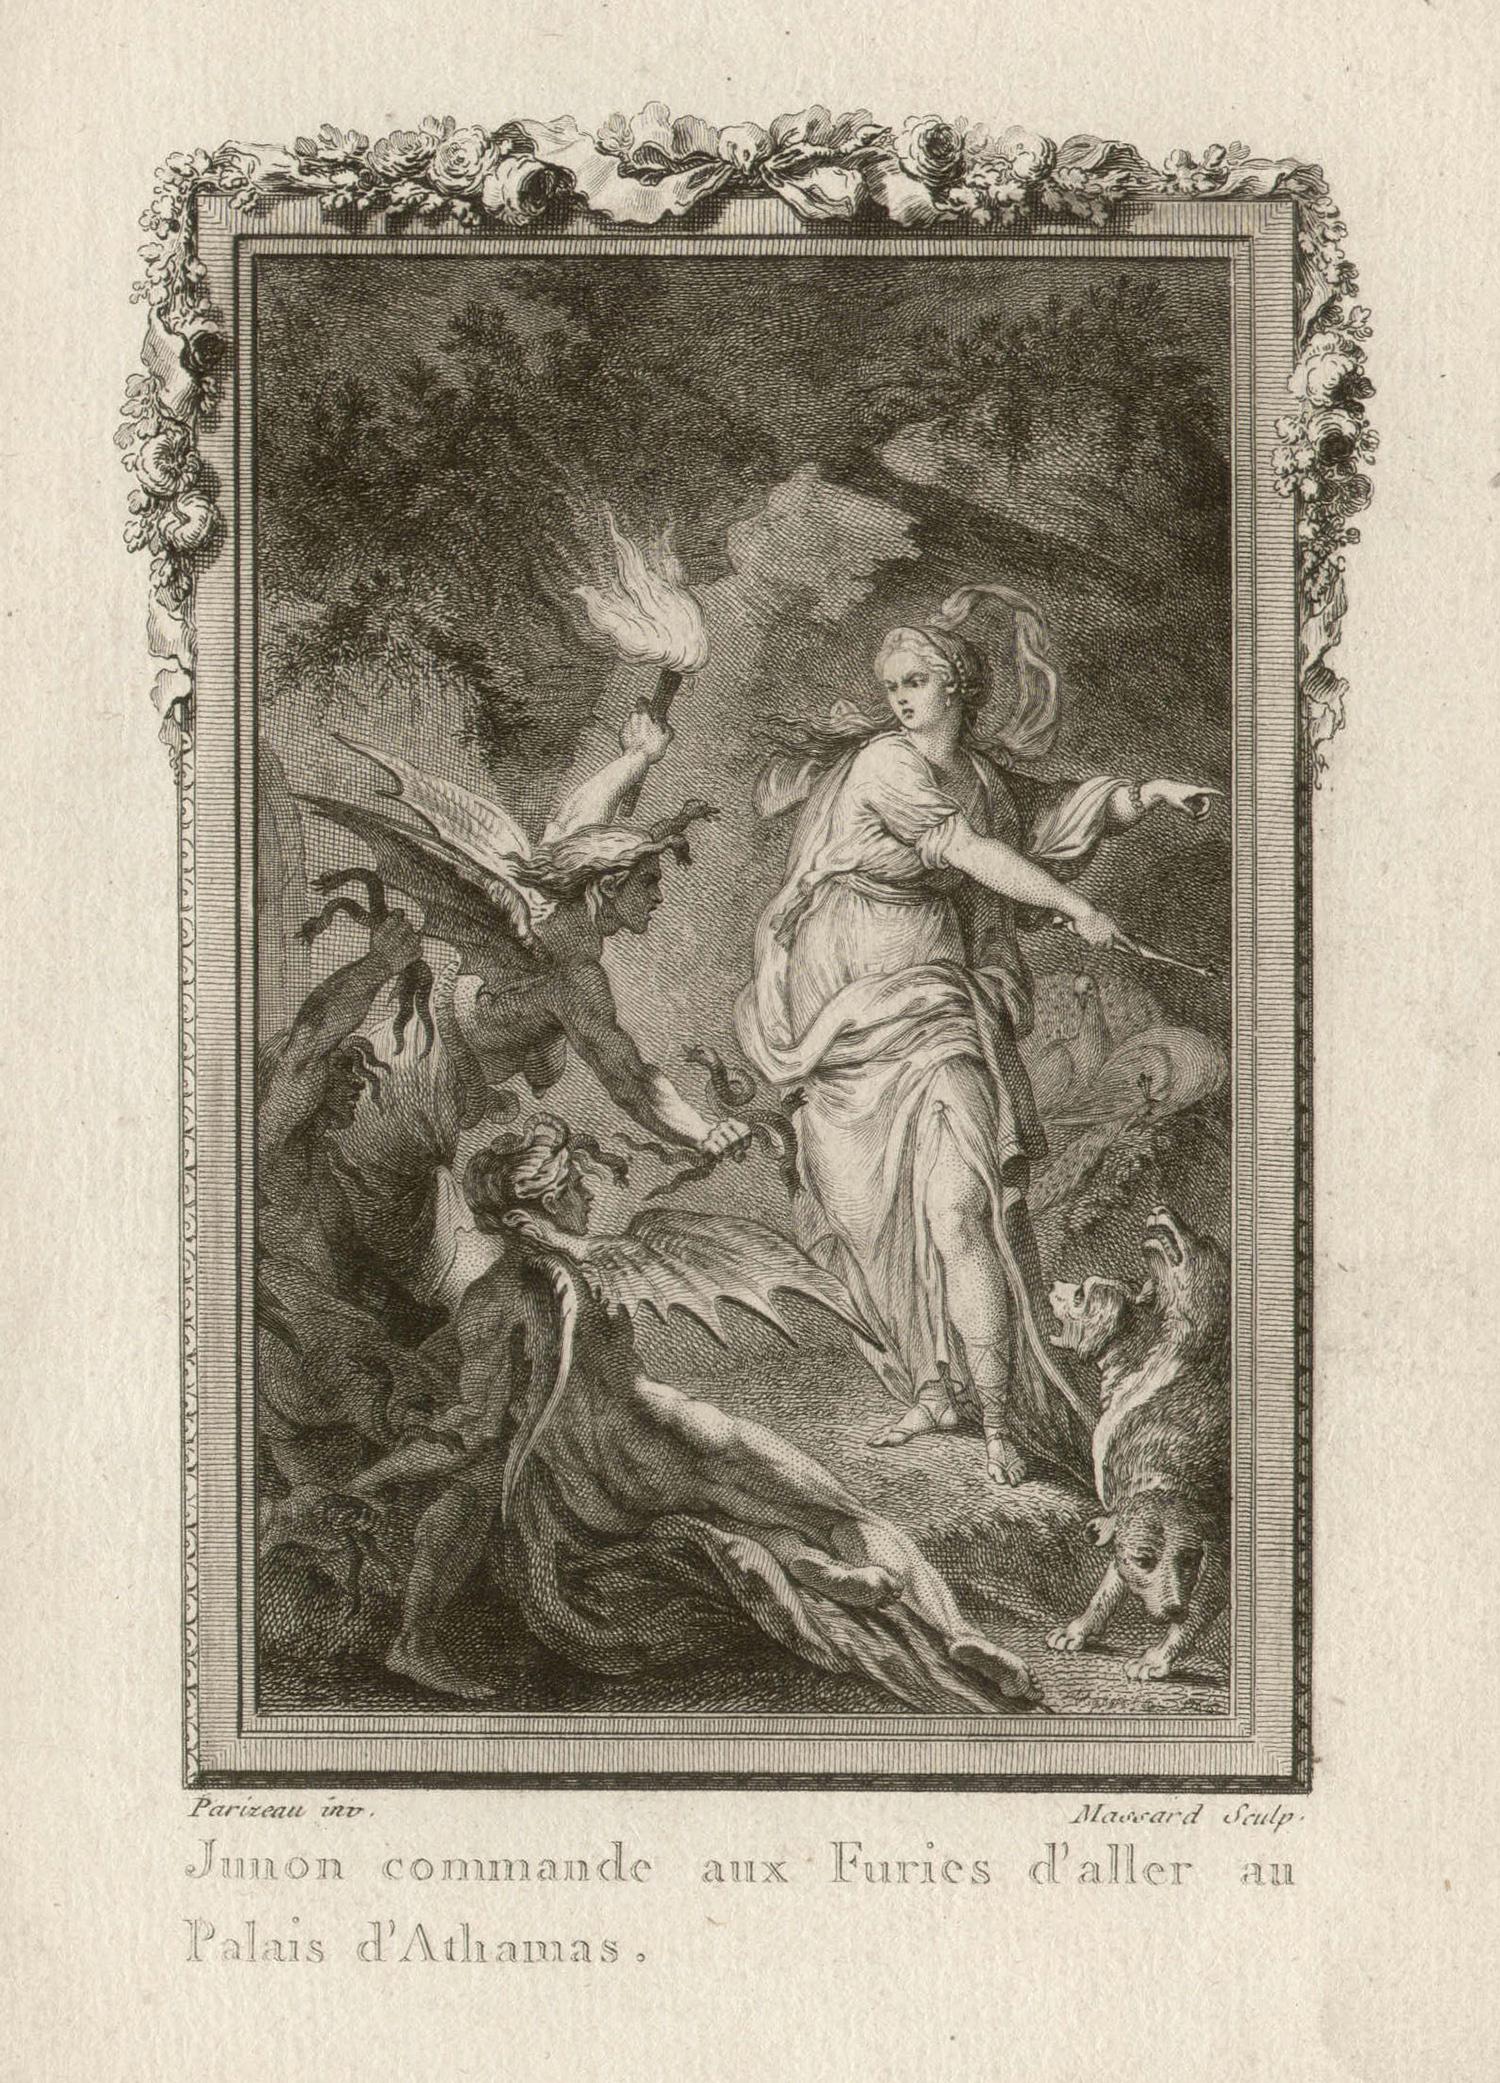 Massard after Parizeau Figurative Print - Juno and the Furies, Ovid's Metamorphoses, French Classical Myth engraving, 1768